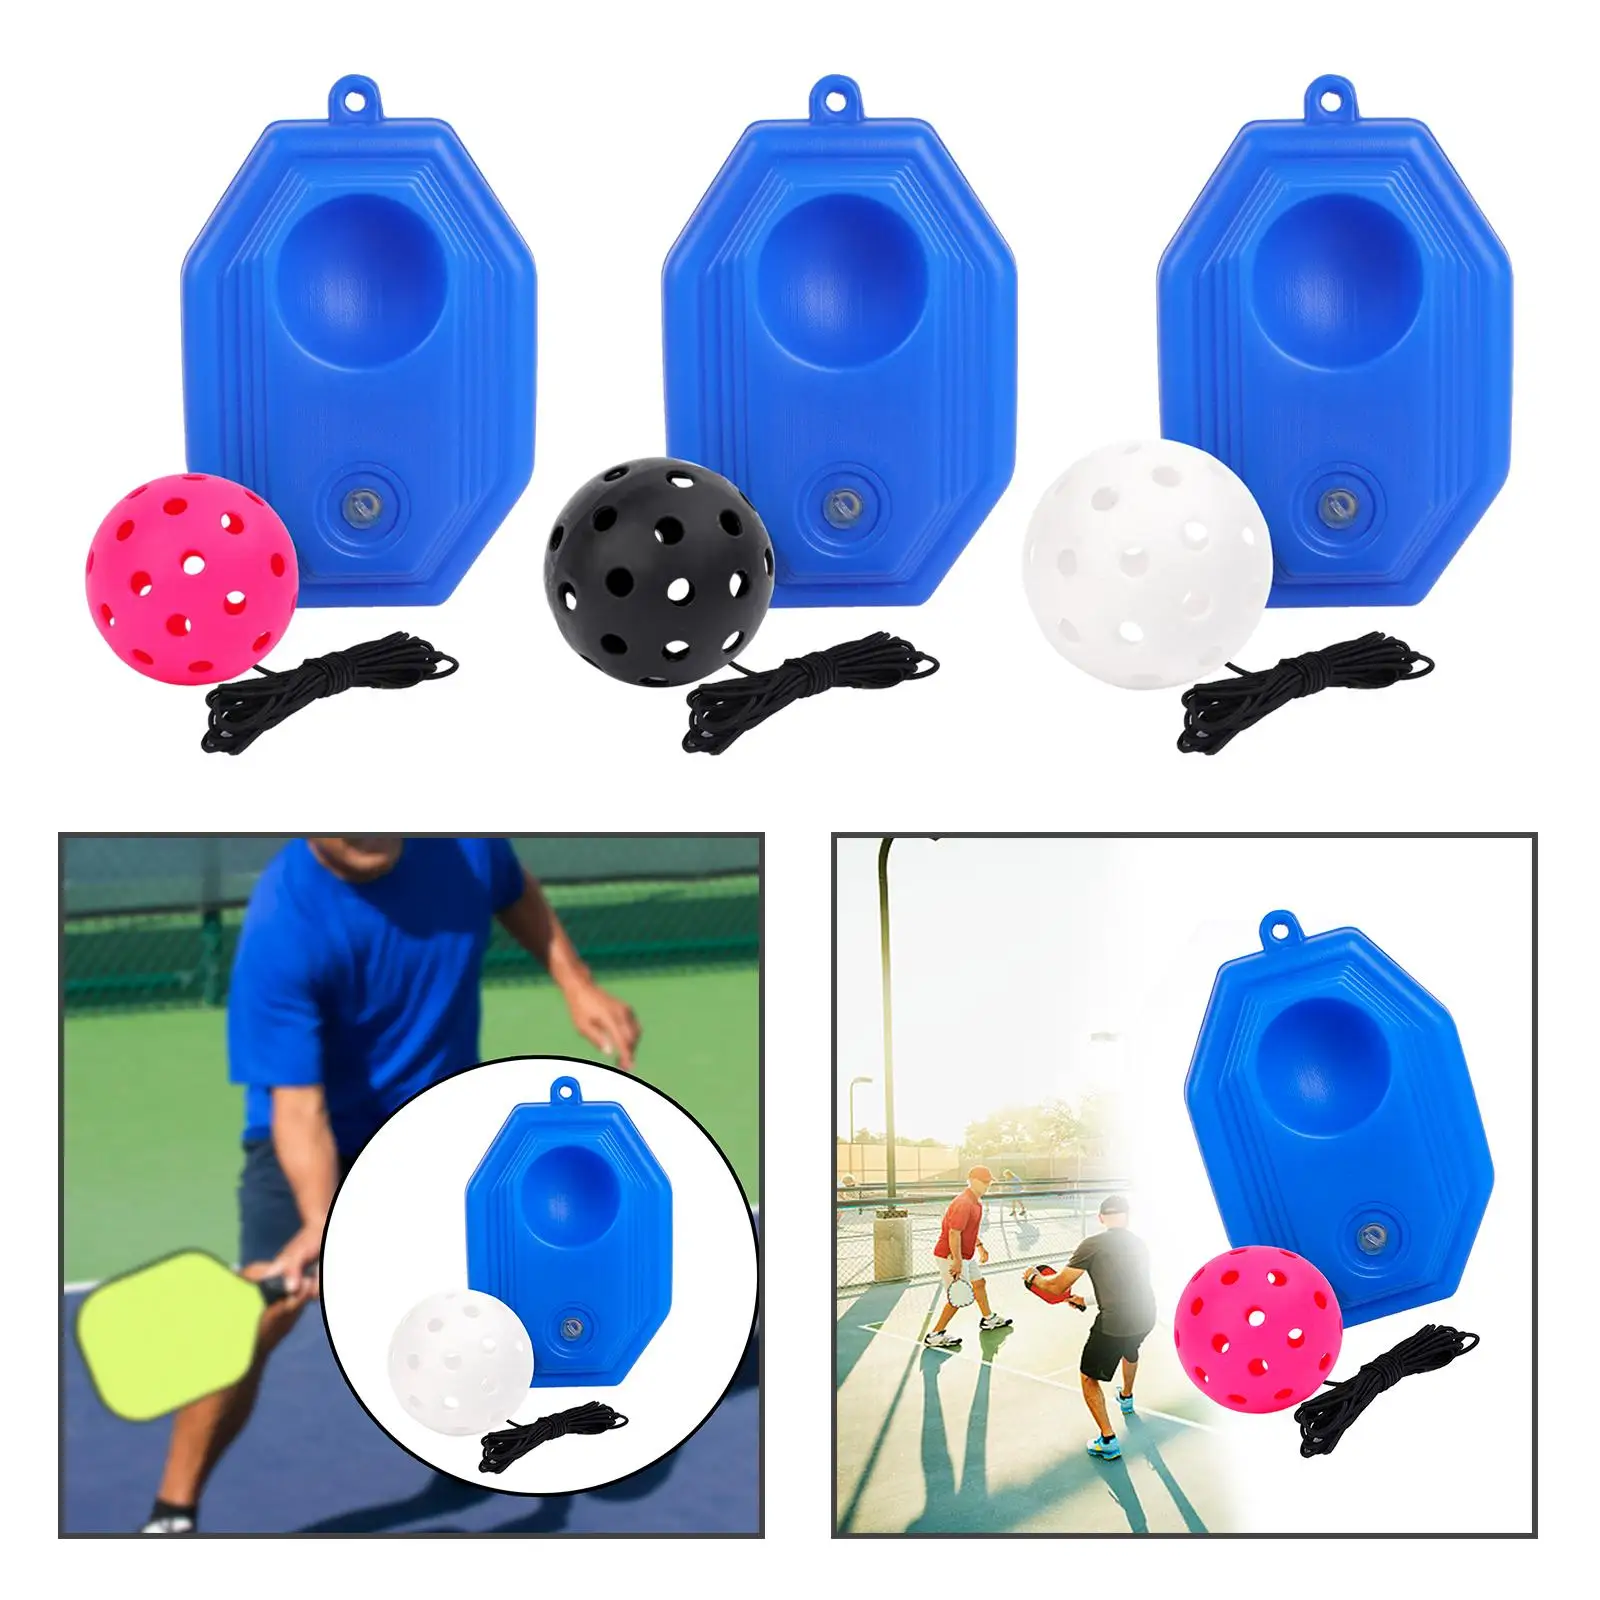 Pickleball Trainer Convenient Pickleball Training Equipment for Exercise Tool Beginners Self Pickleball Practice Kids Adults